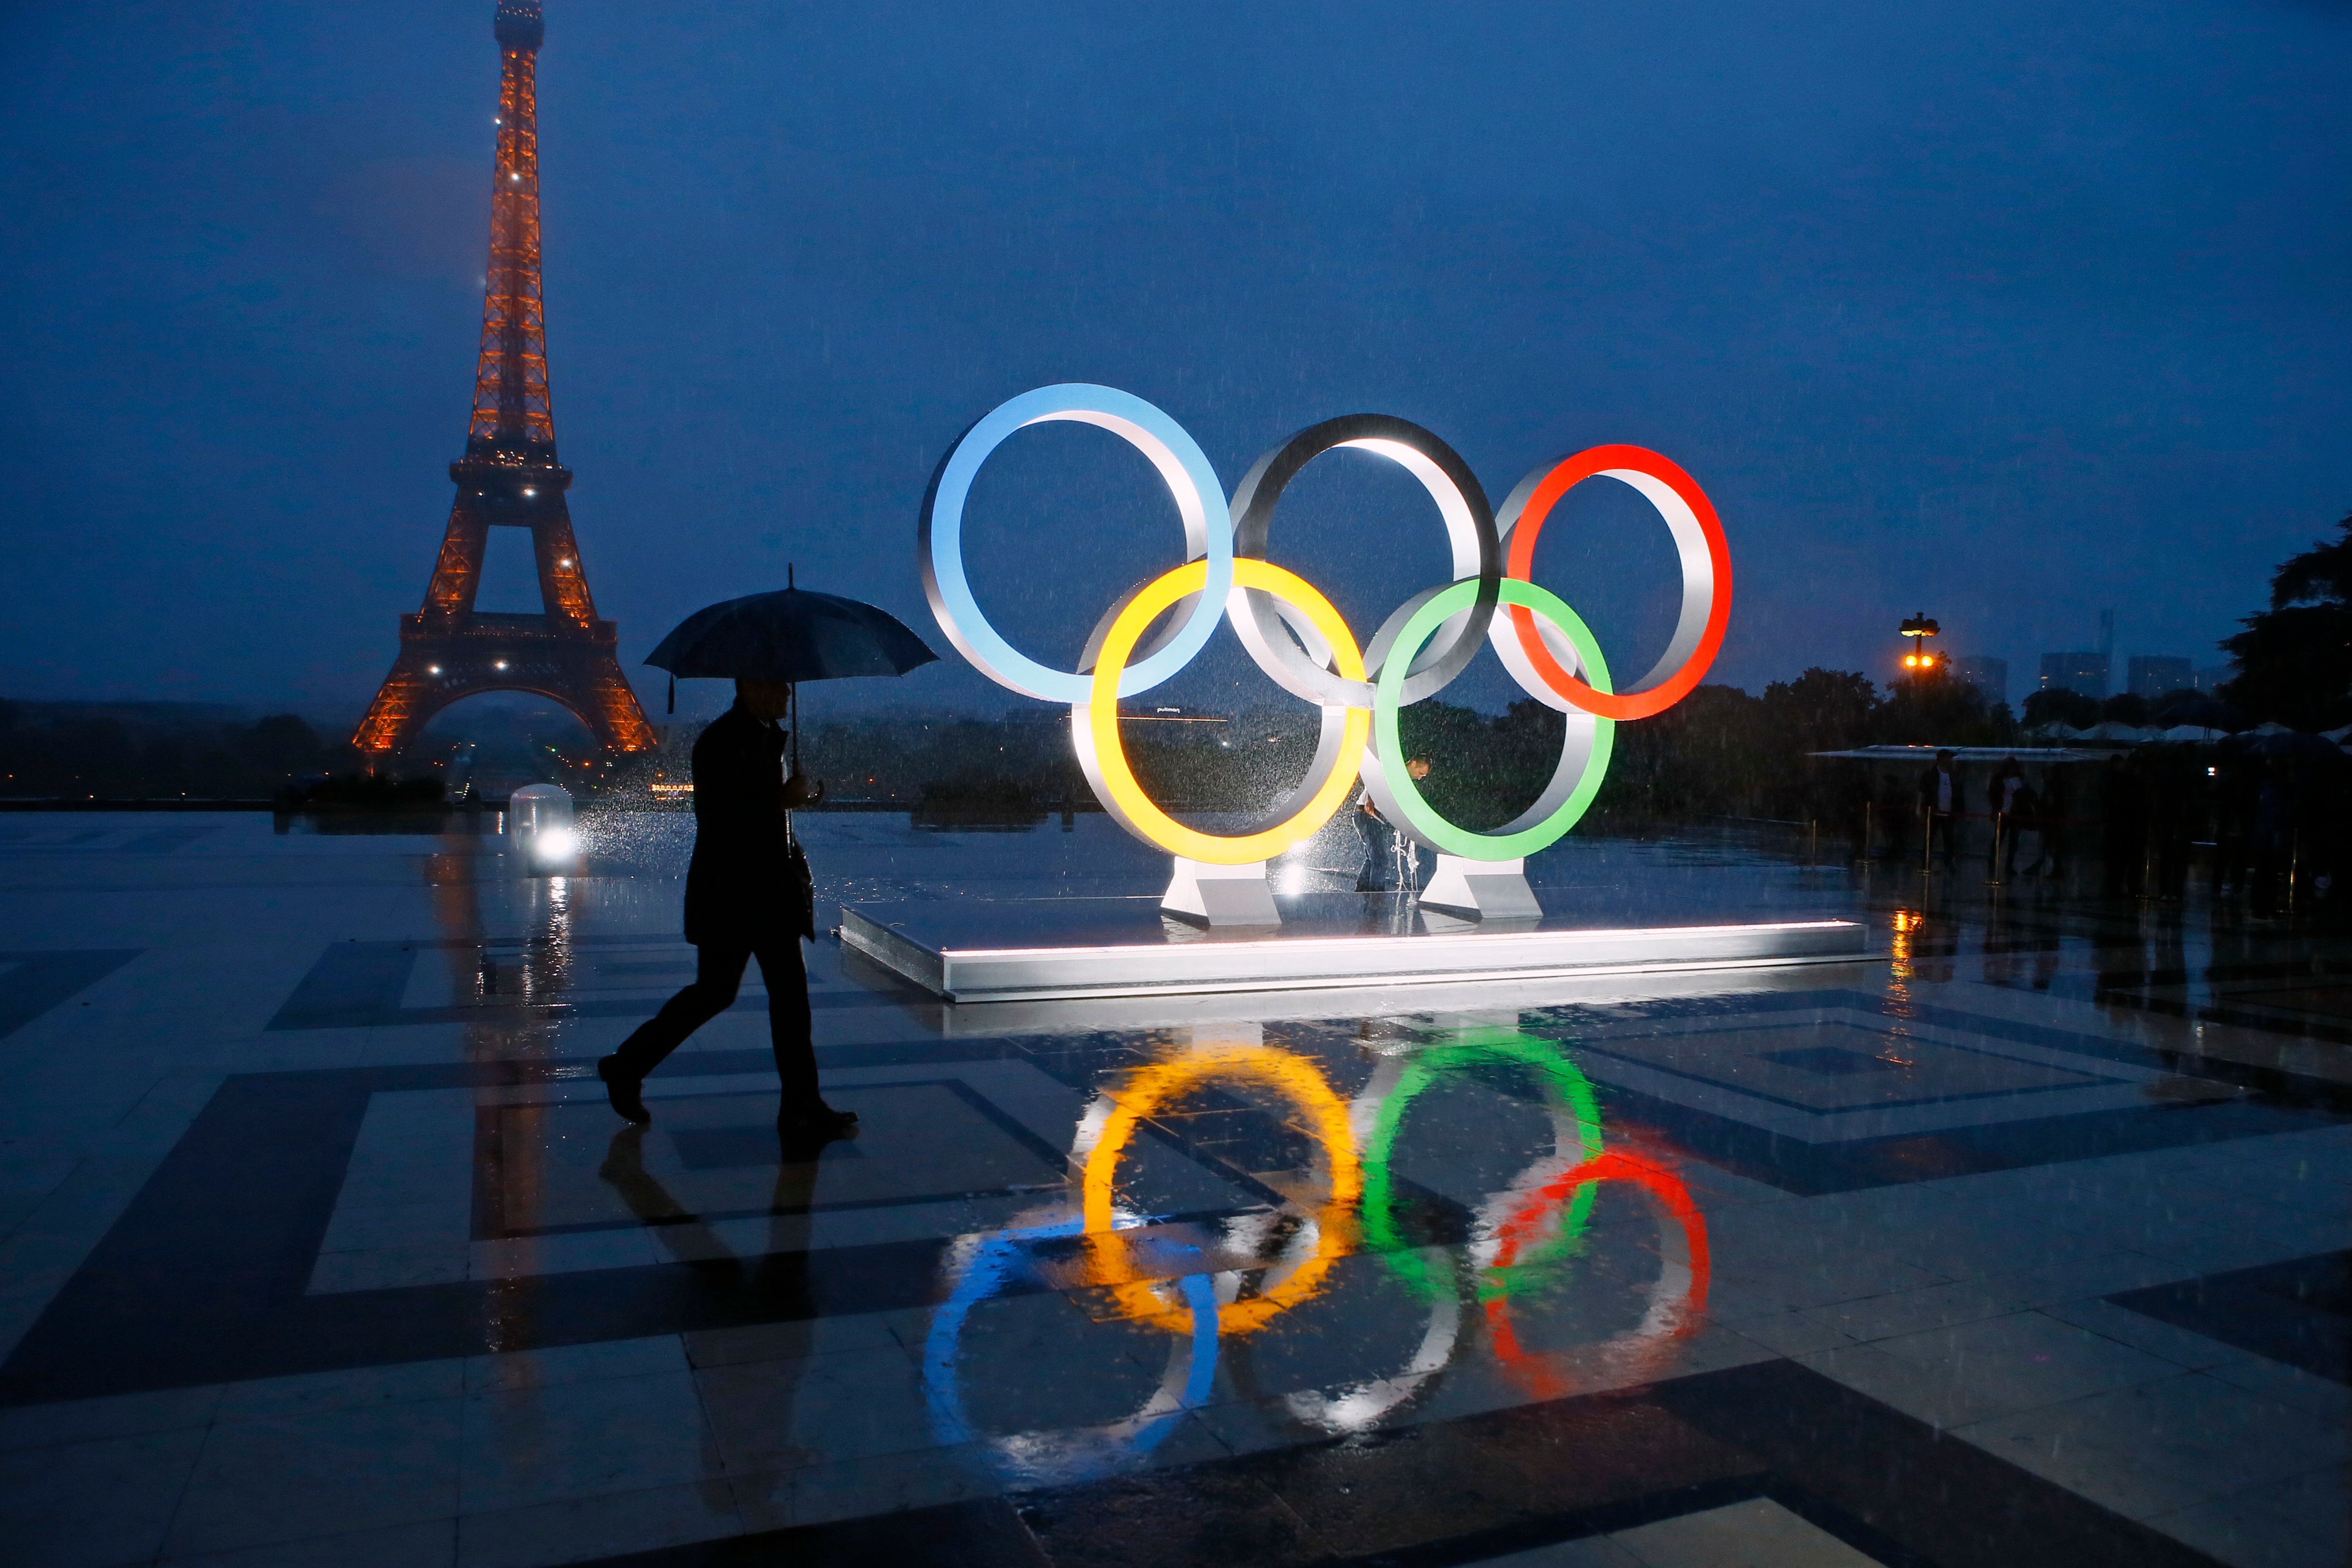 Registration closes for Paris Olympics ticket lottery draw